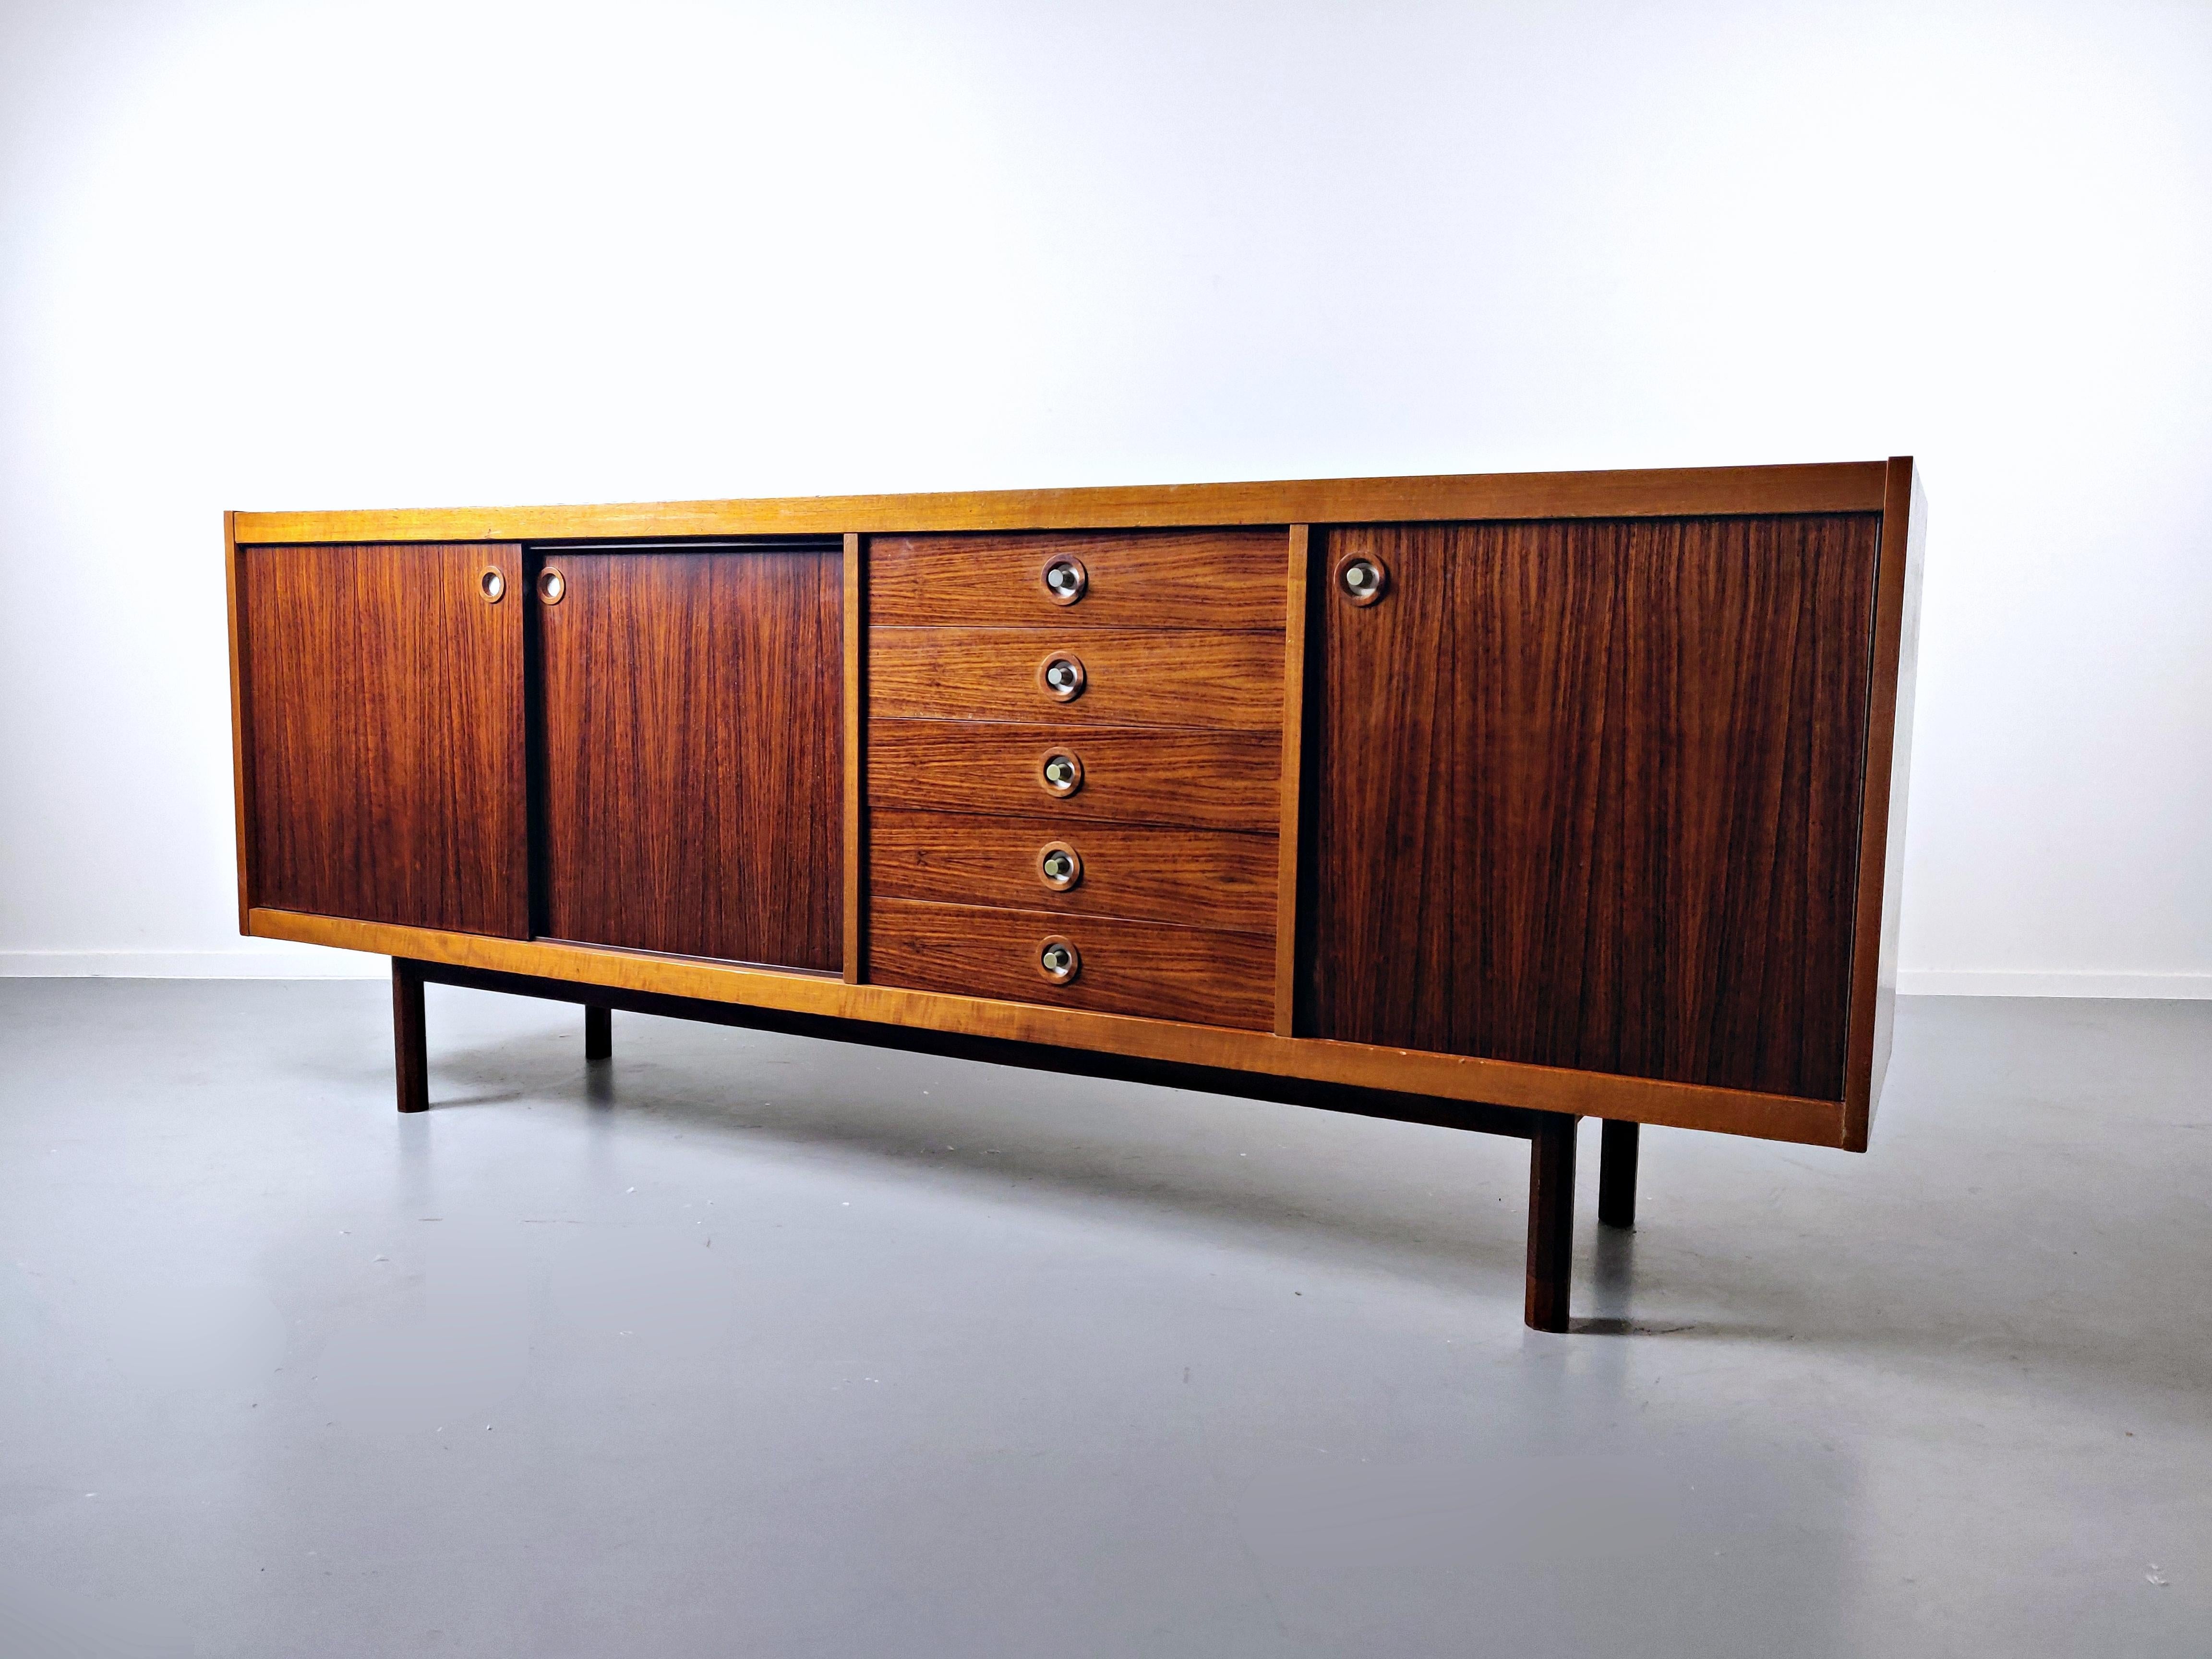 Georges Coslin Mid-Century Modern Wooden Sideboard, 1950s For Sale 1